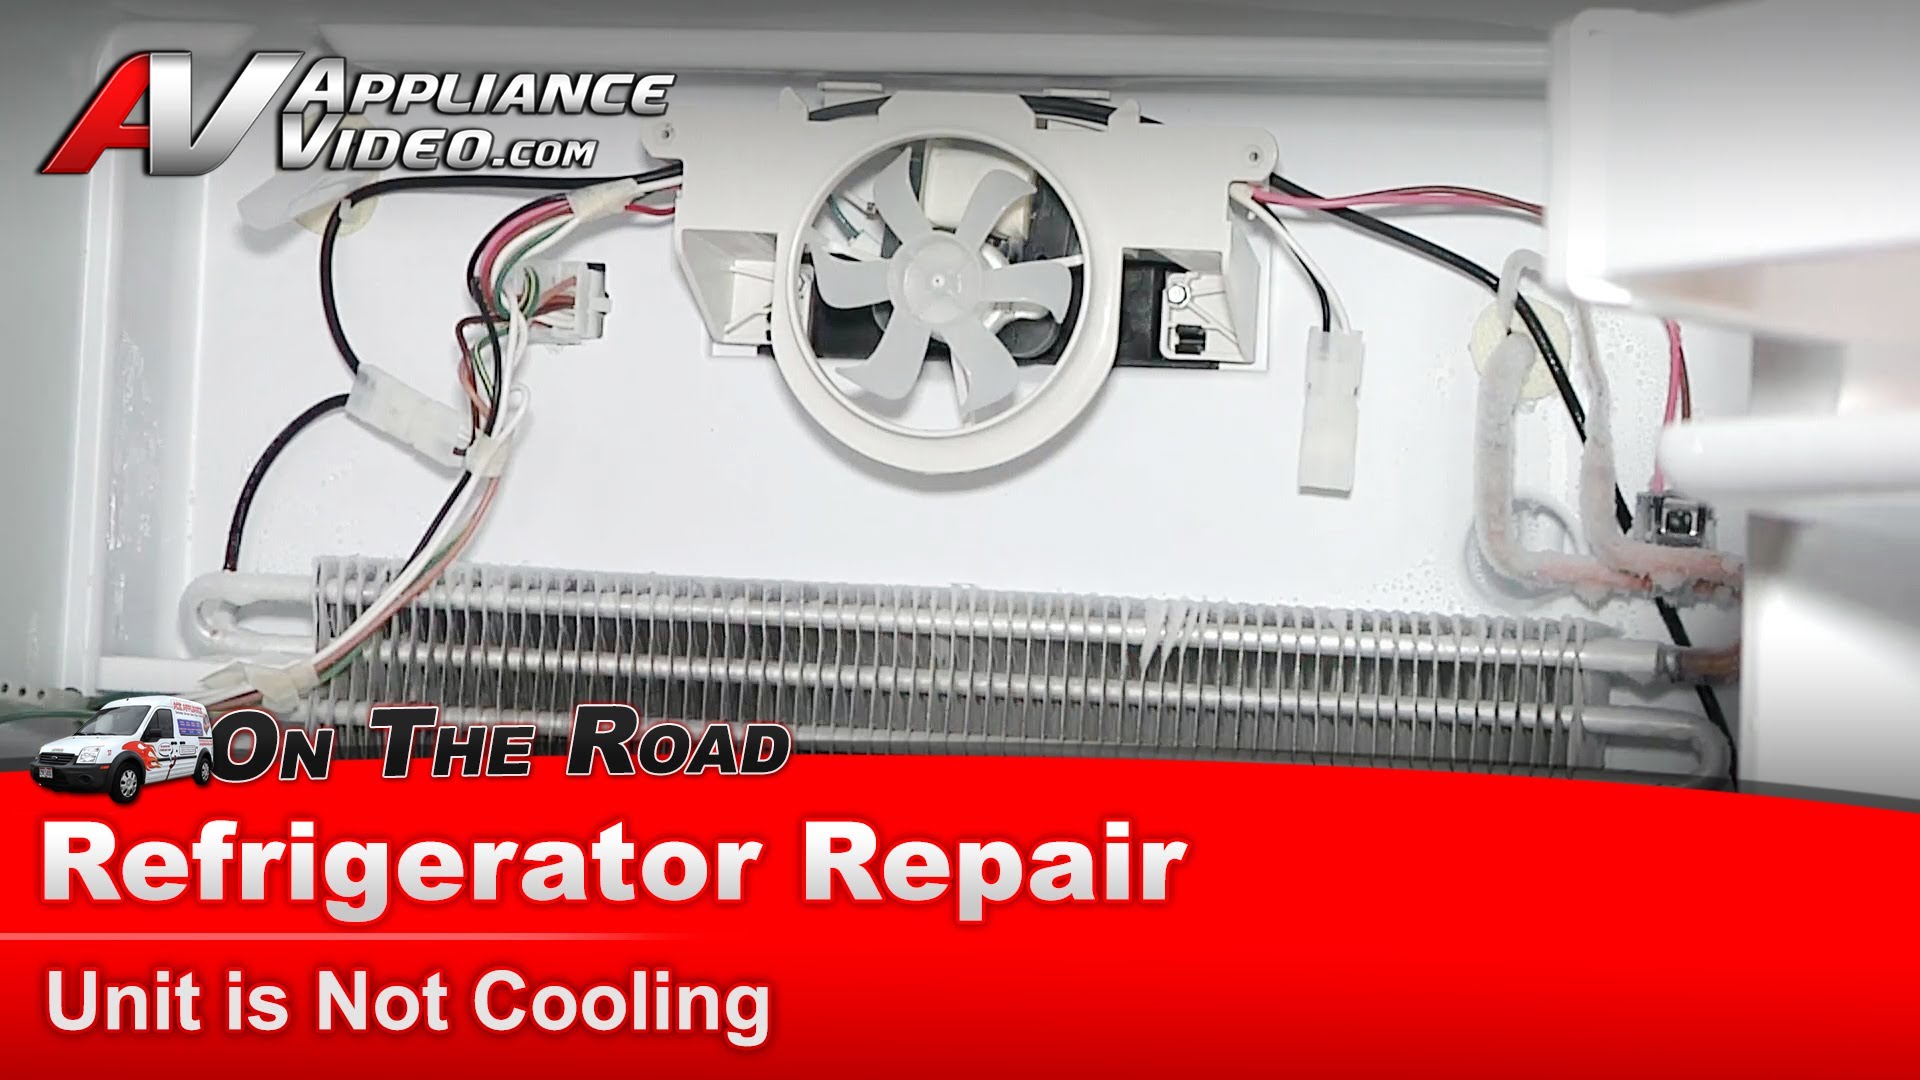 Amana A9RXNMFWW02 Refrigerator Repair – The fridge does not cool ...